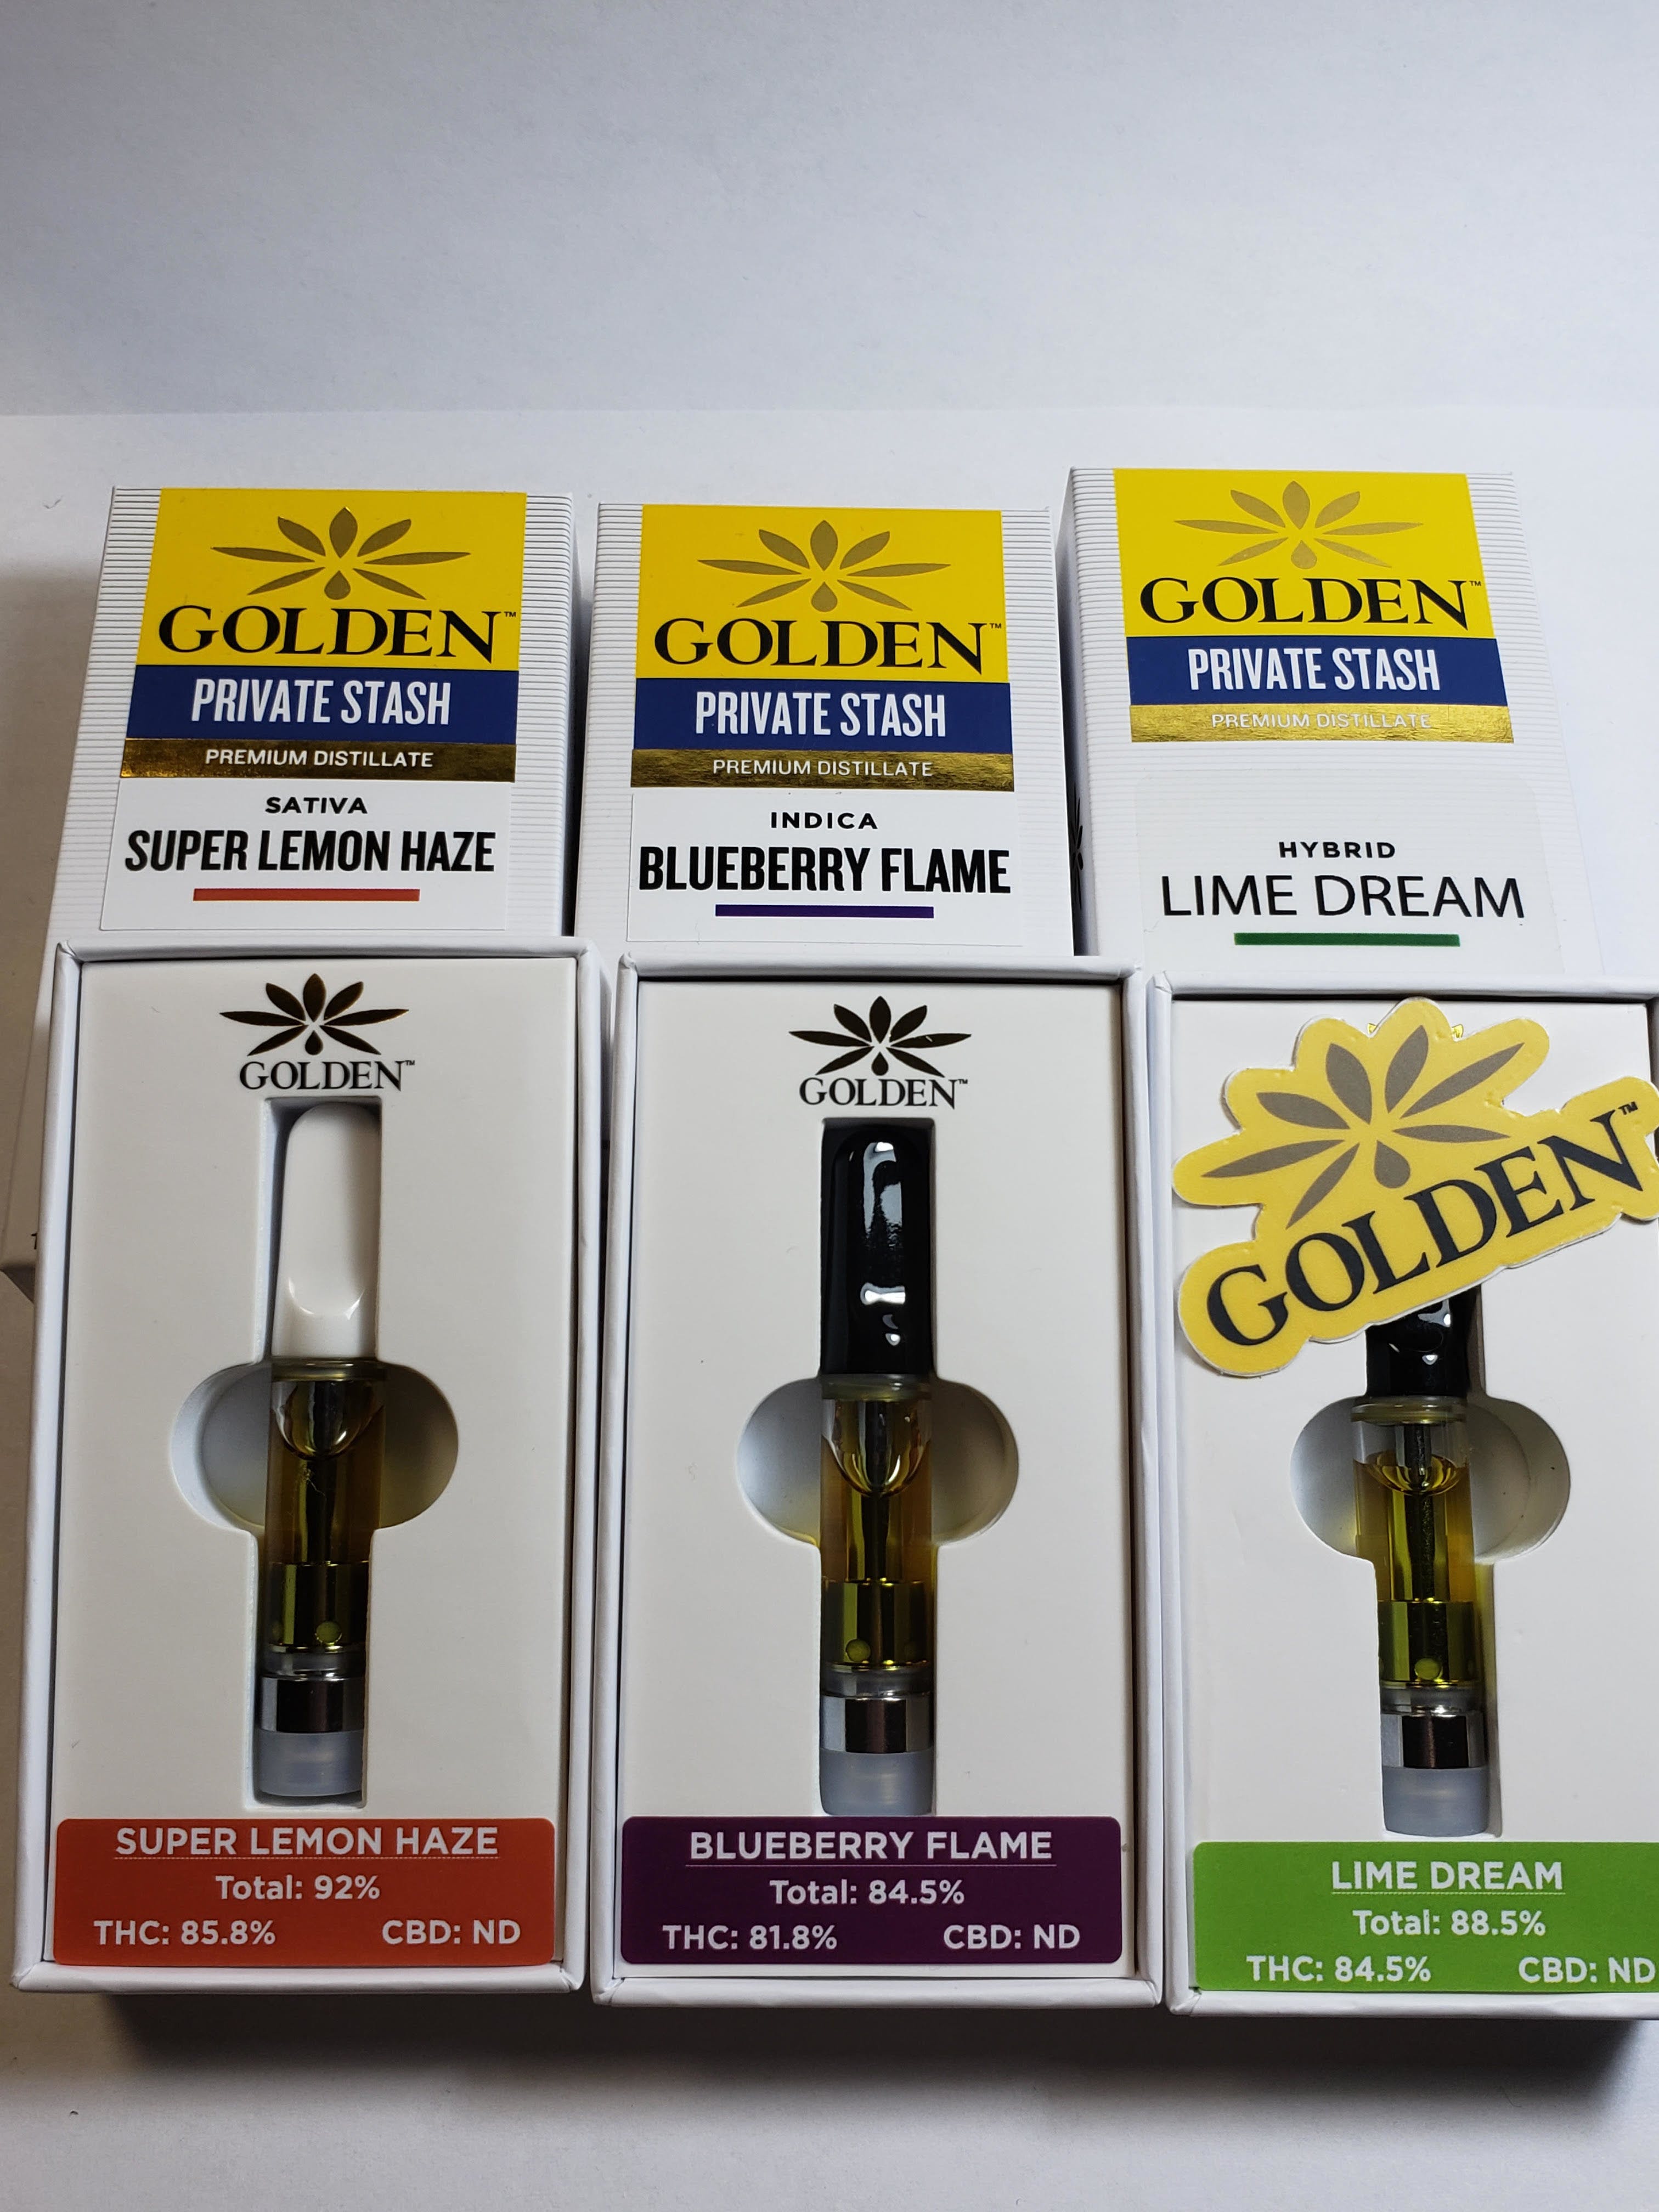 concentrate-golden-private-stash-blueberry-flame-1g-distillate-cartridge